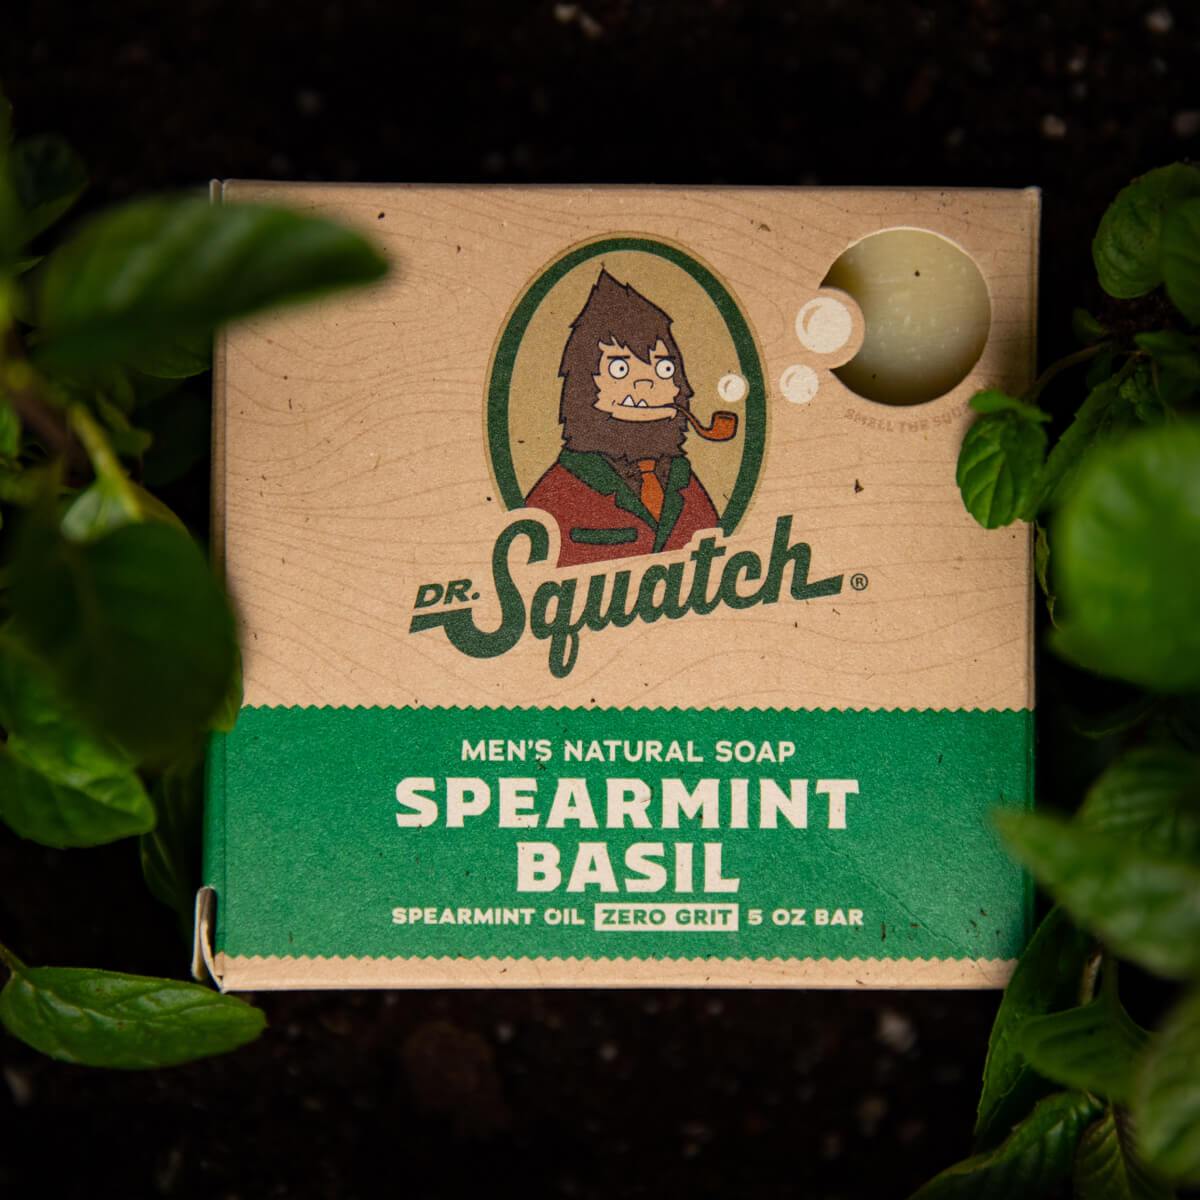 Dr Squatch for Women?